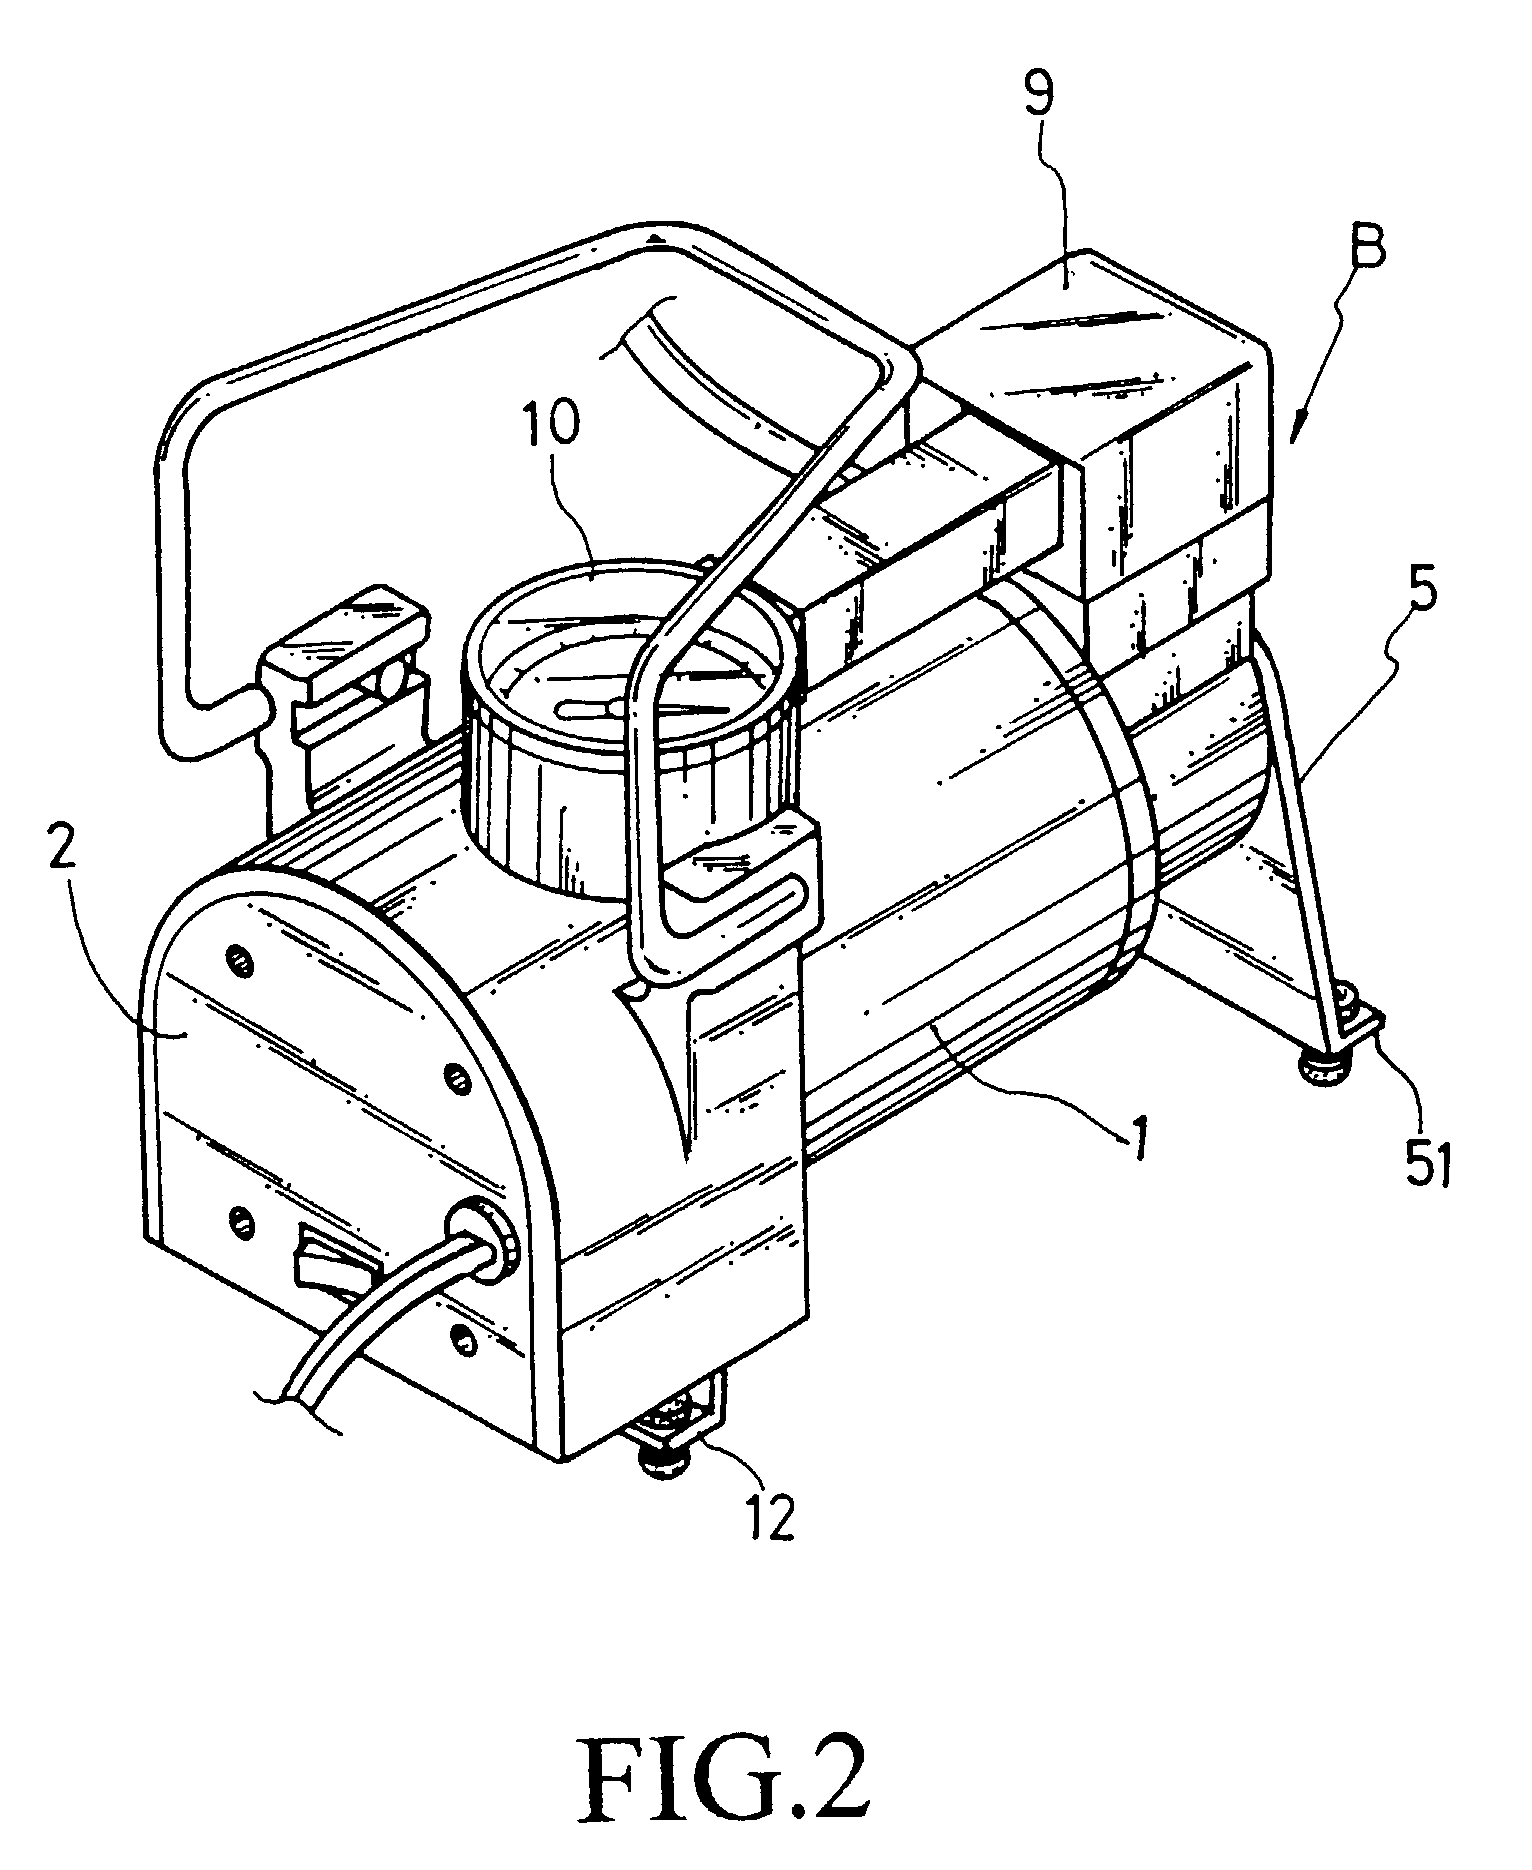 Structure of an air inflation device